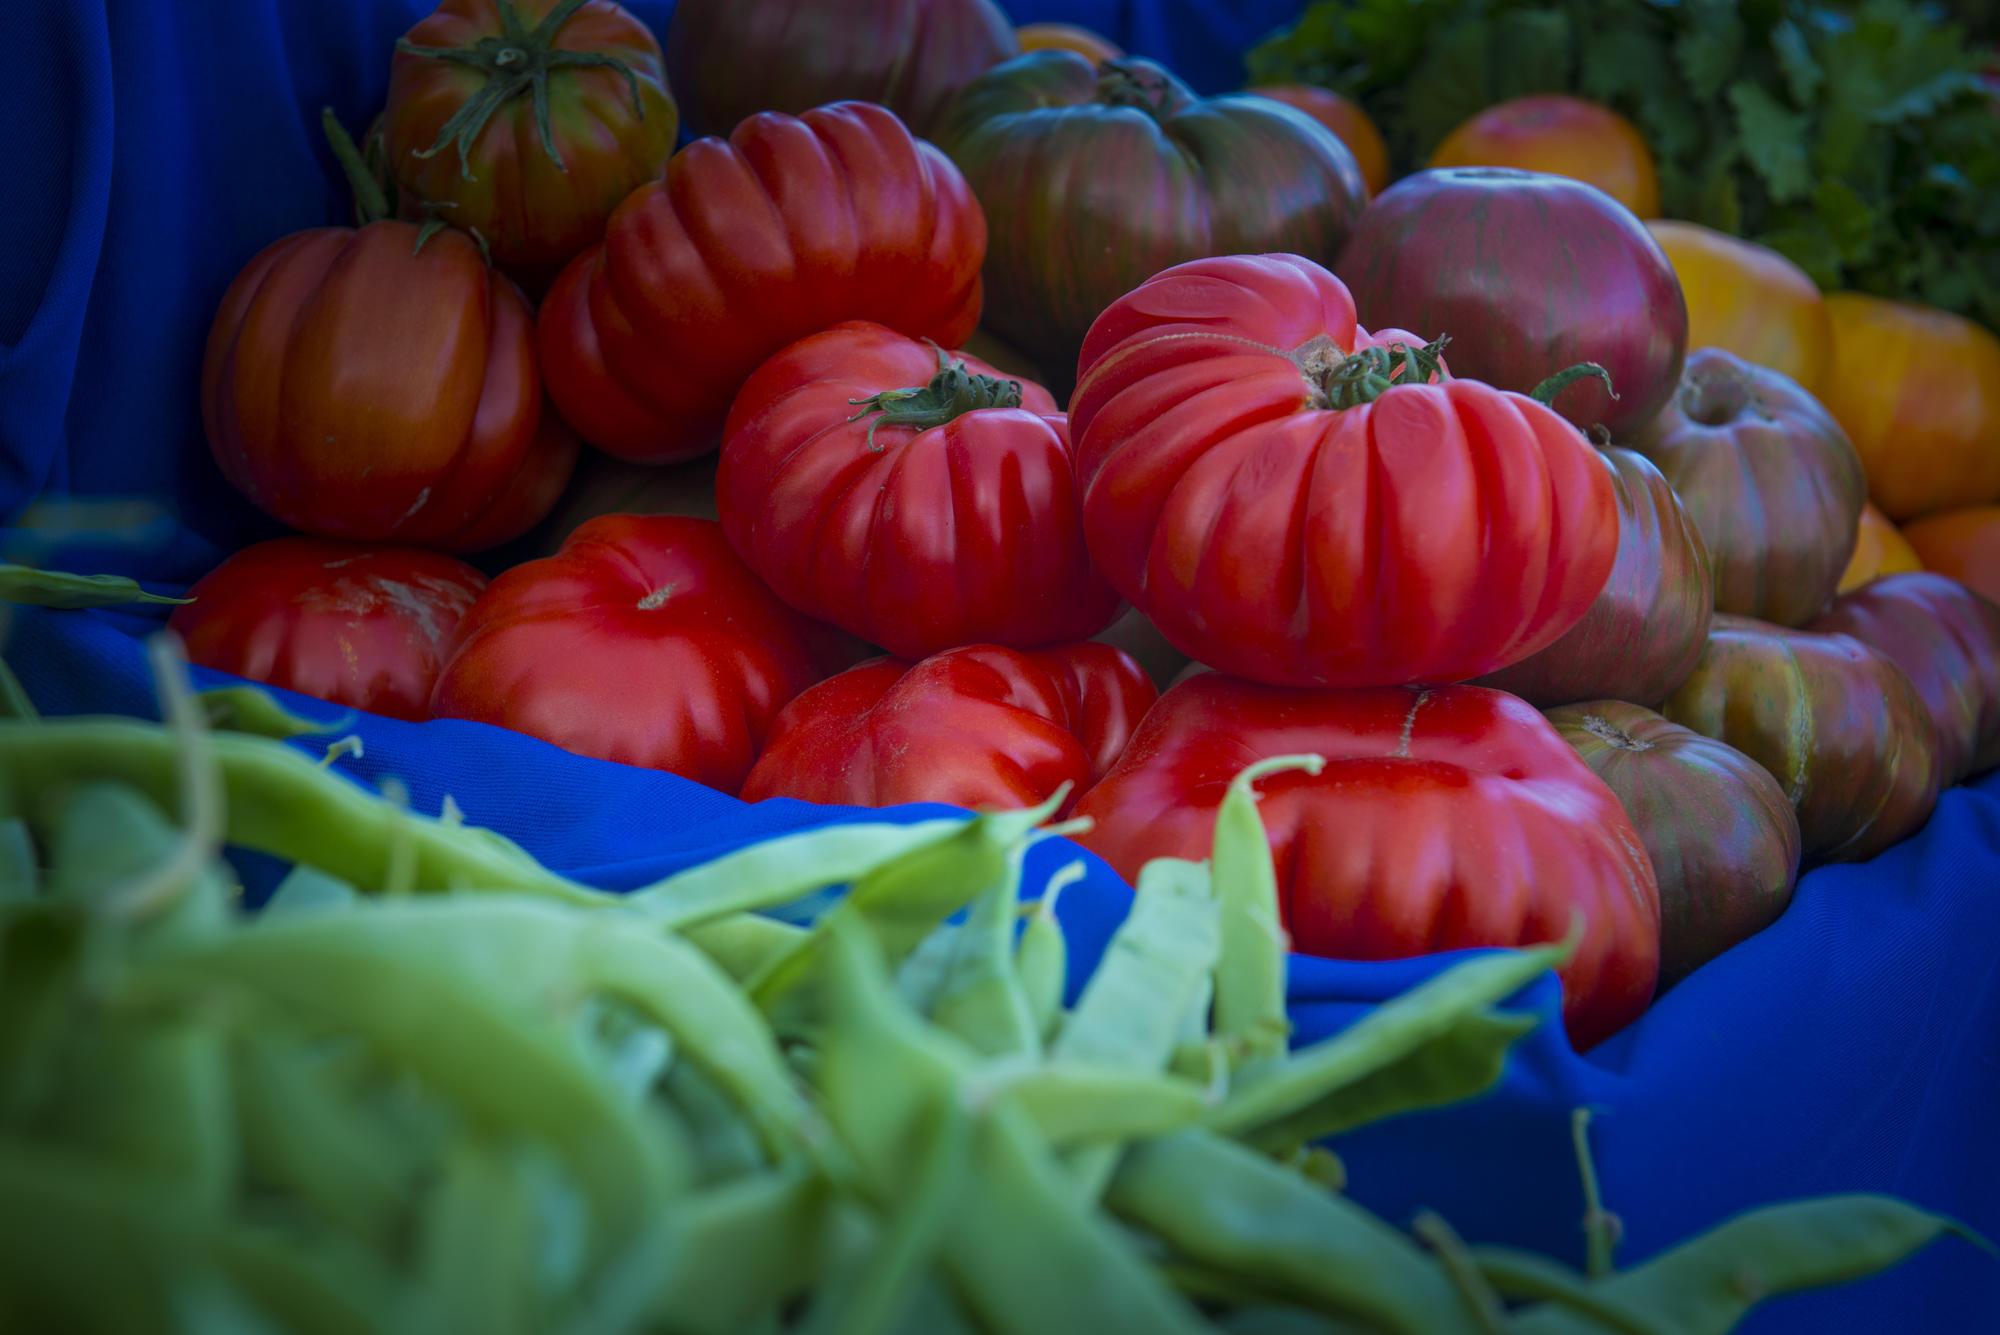 Ripe tomatoes are displayed on a table with other produce.